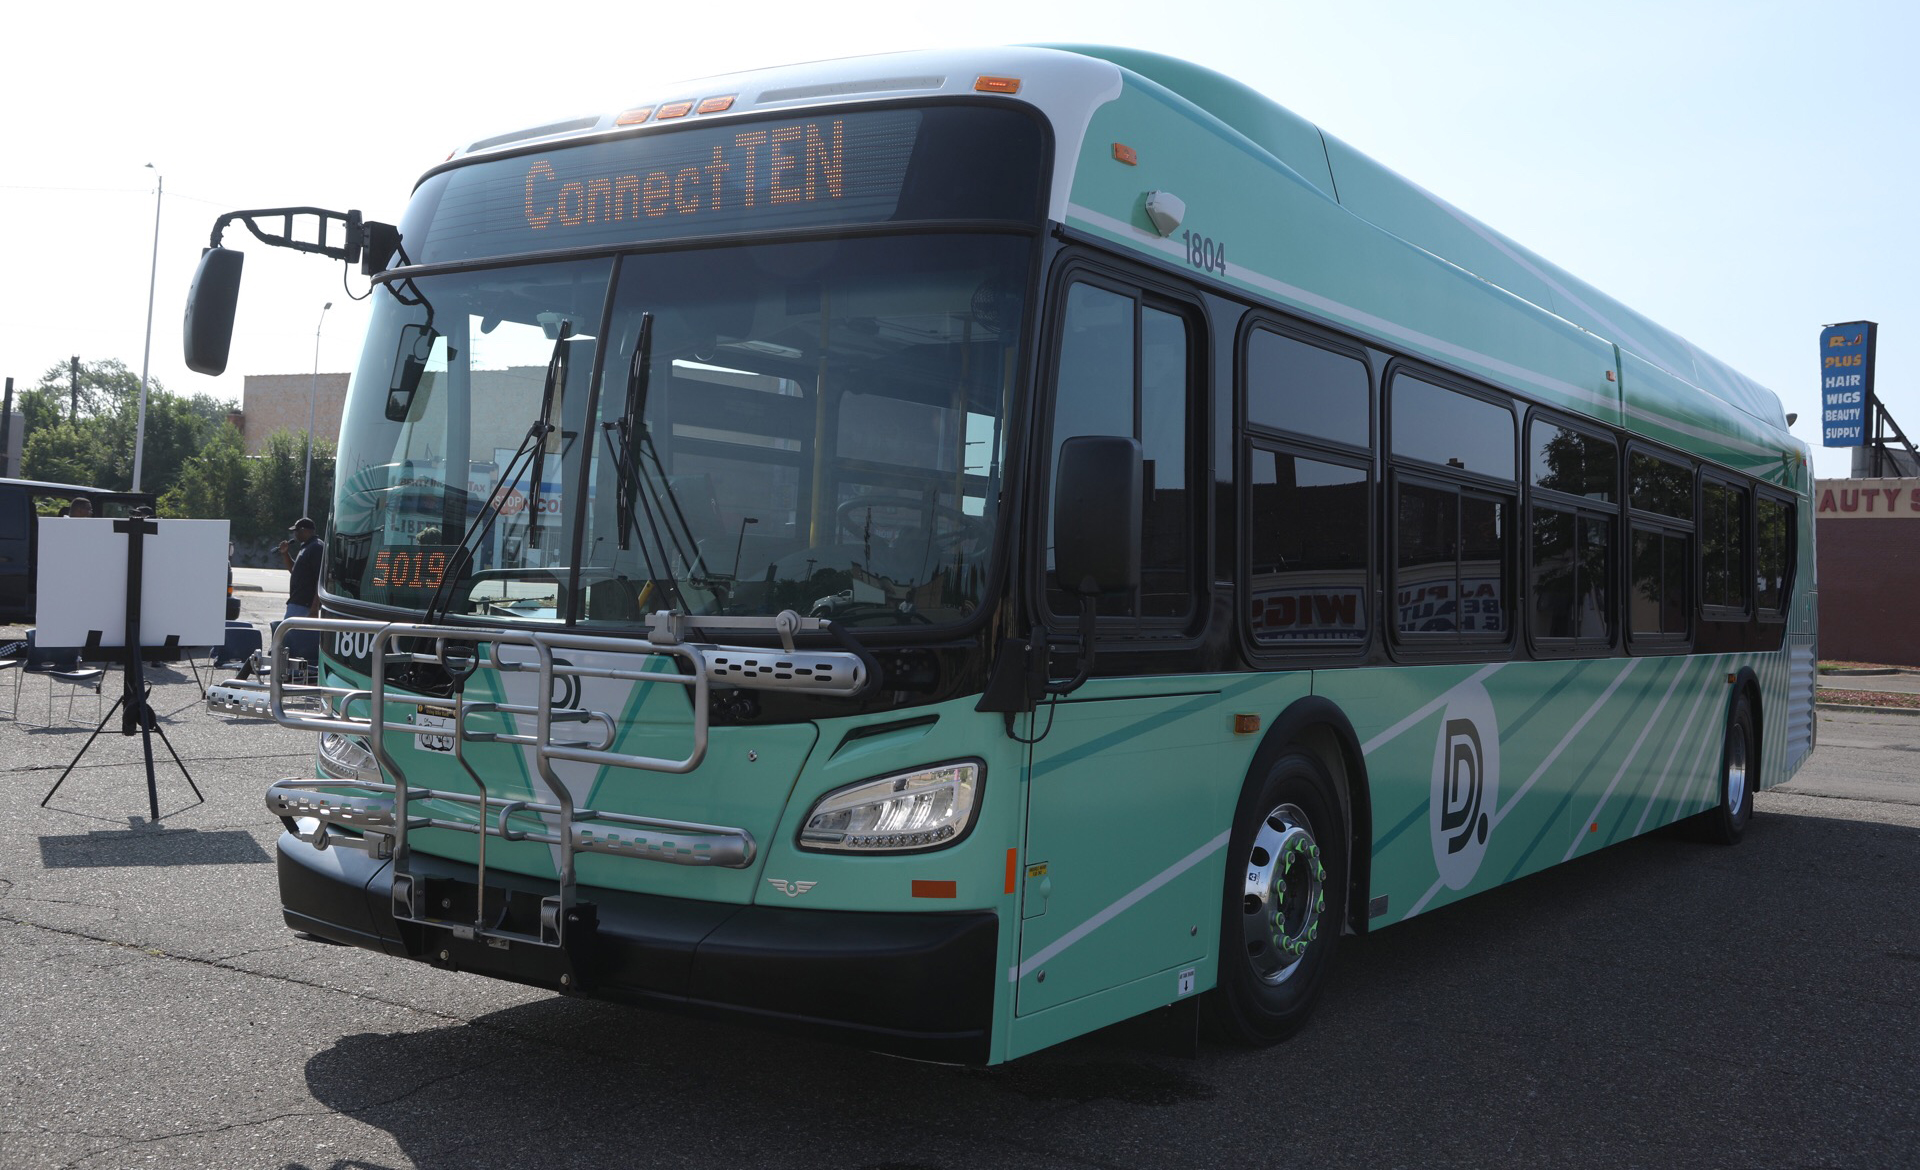 ddot adds to bus service as it rebrands